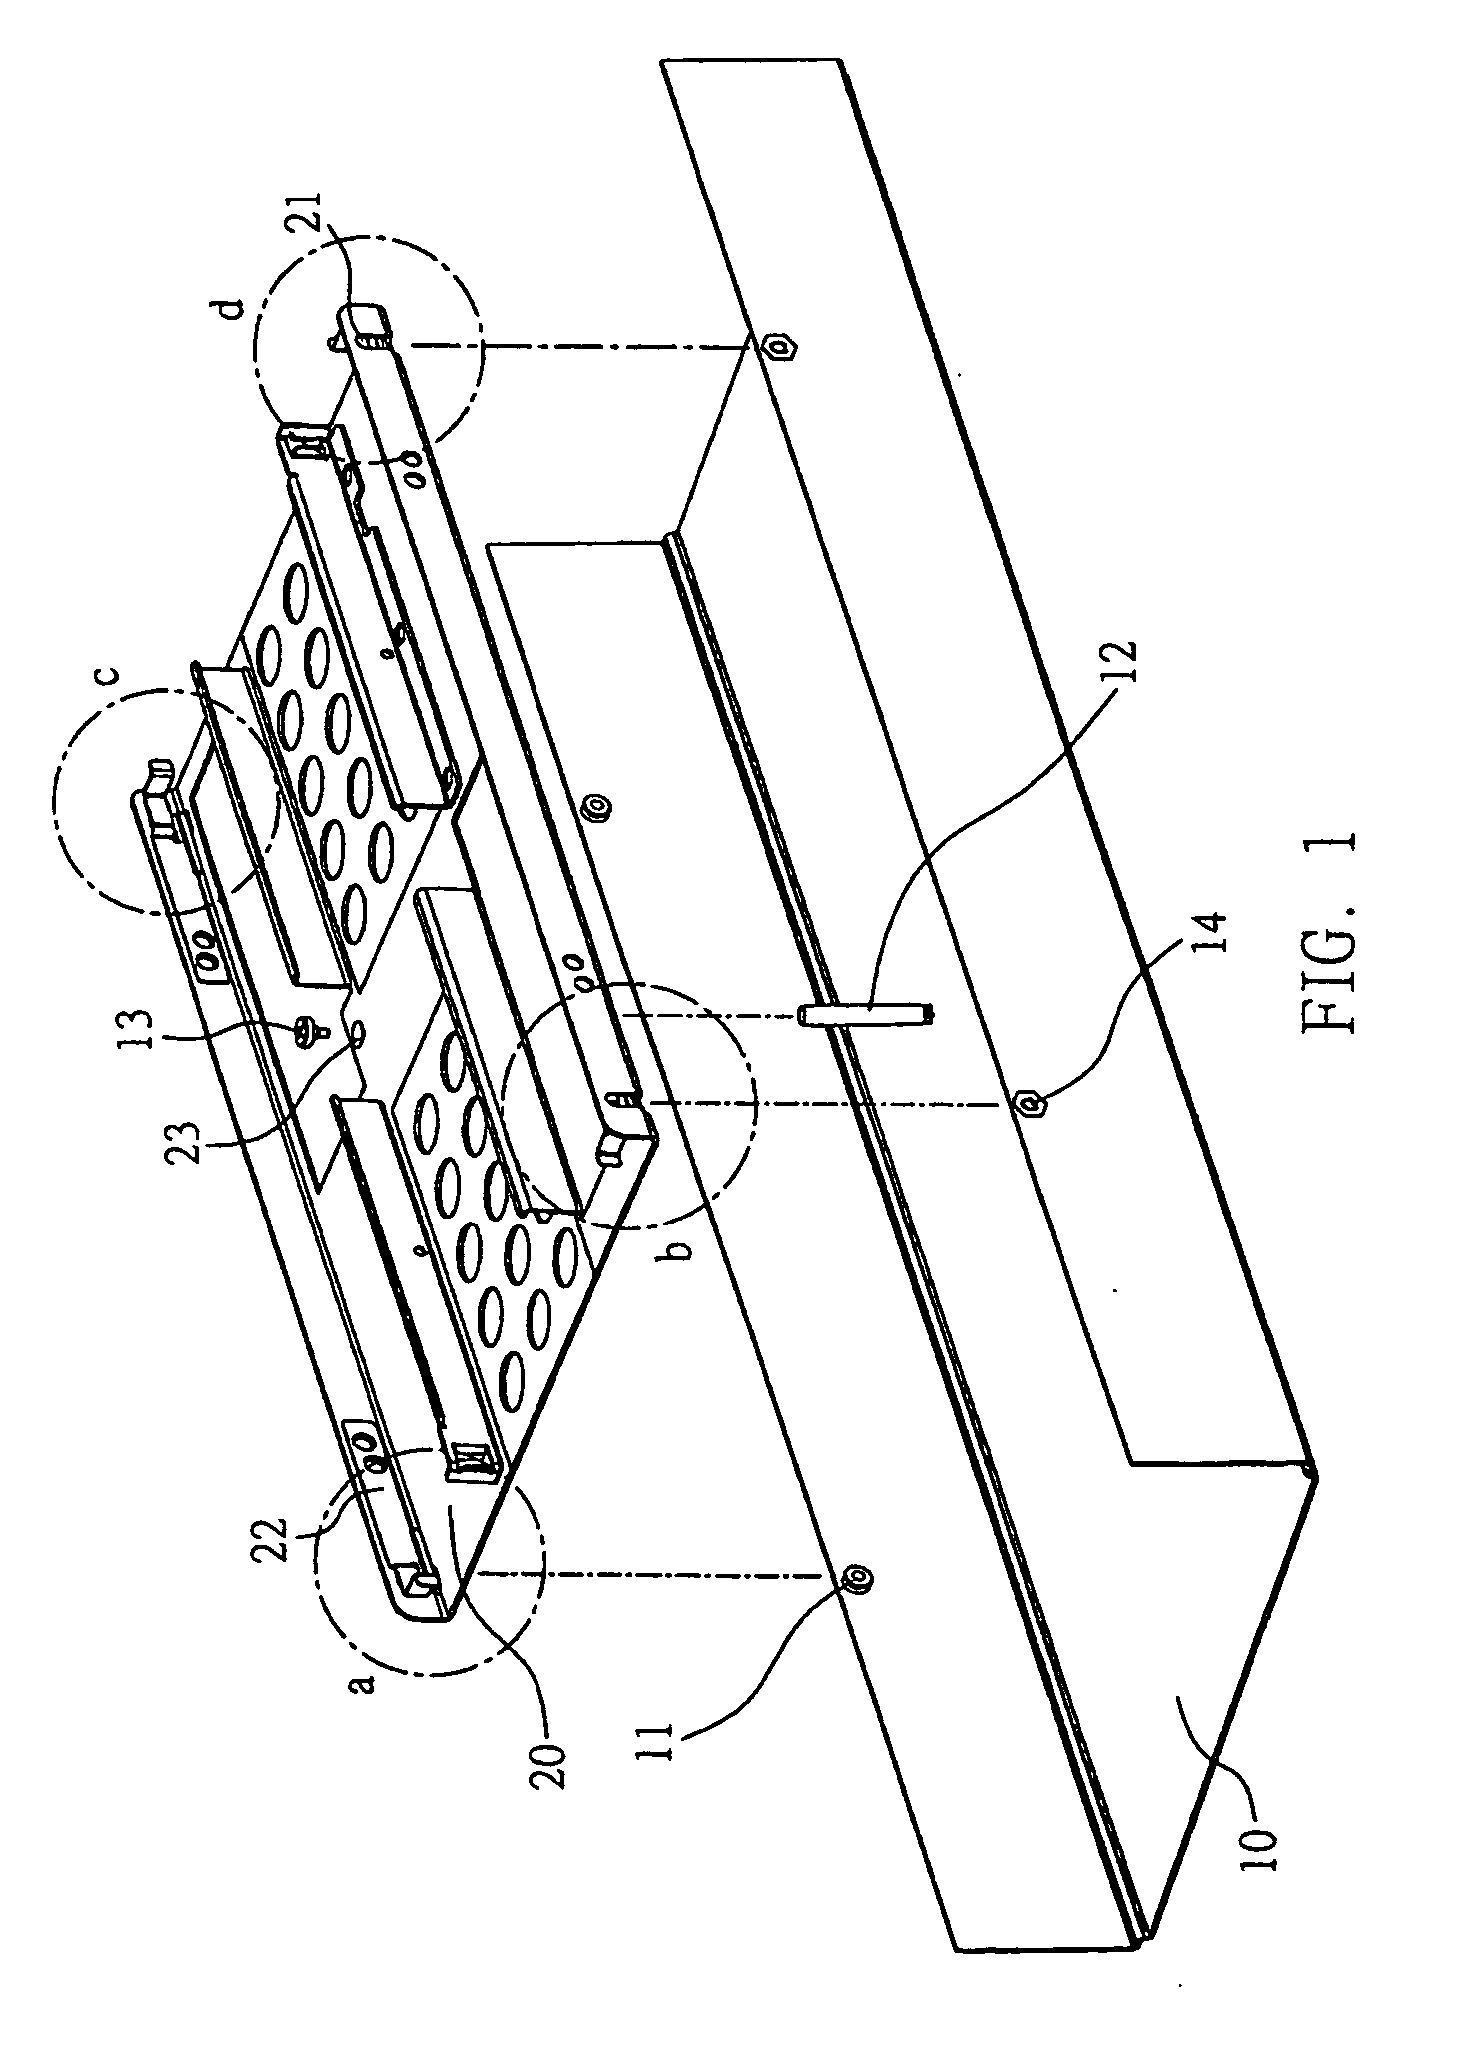 Supporting mechanism for storage drives